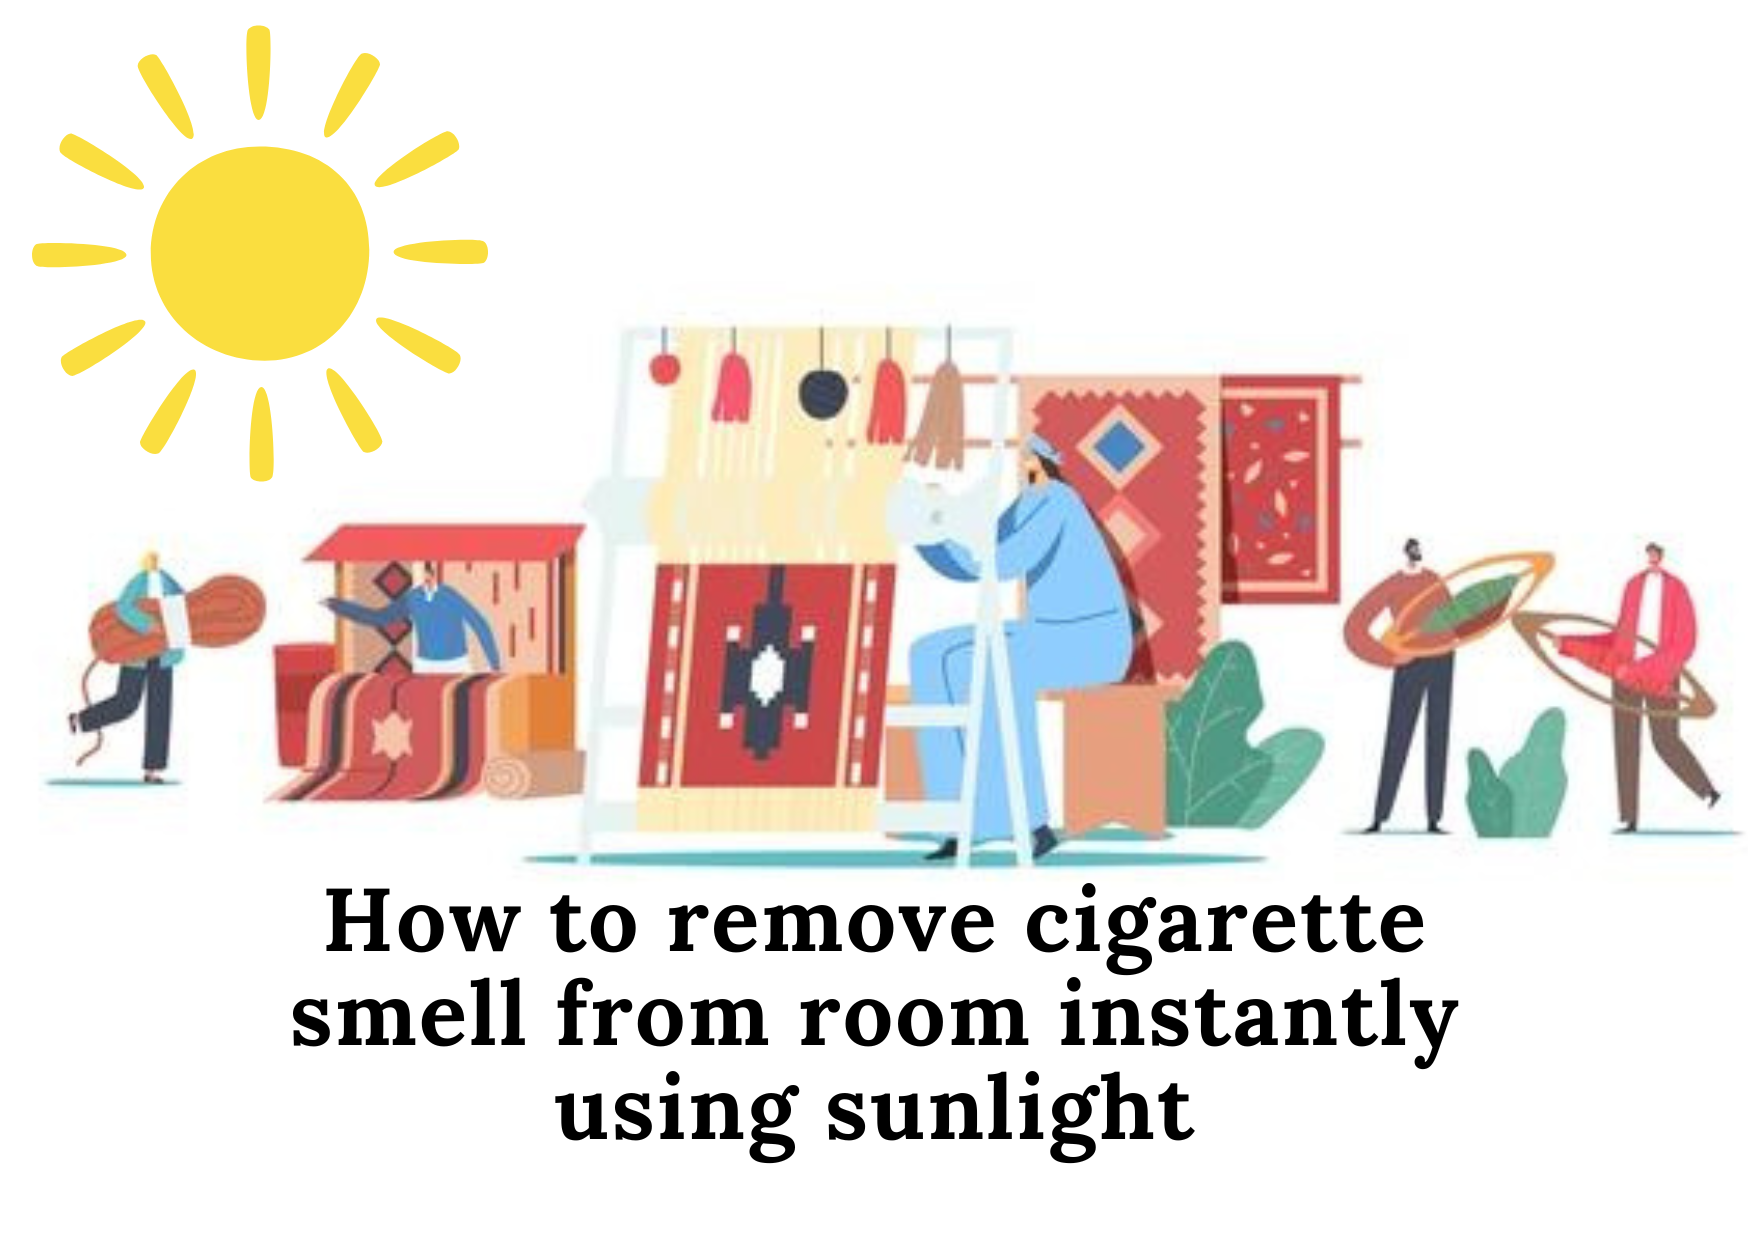 6. How to remove cigarette smell from room instantly using sunlight